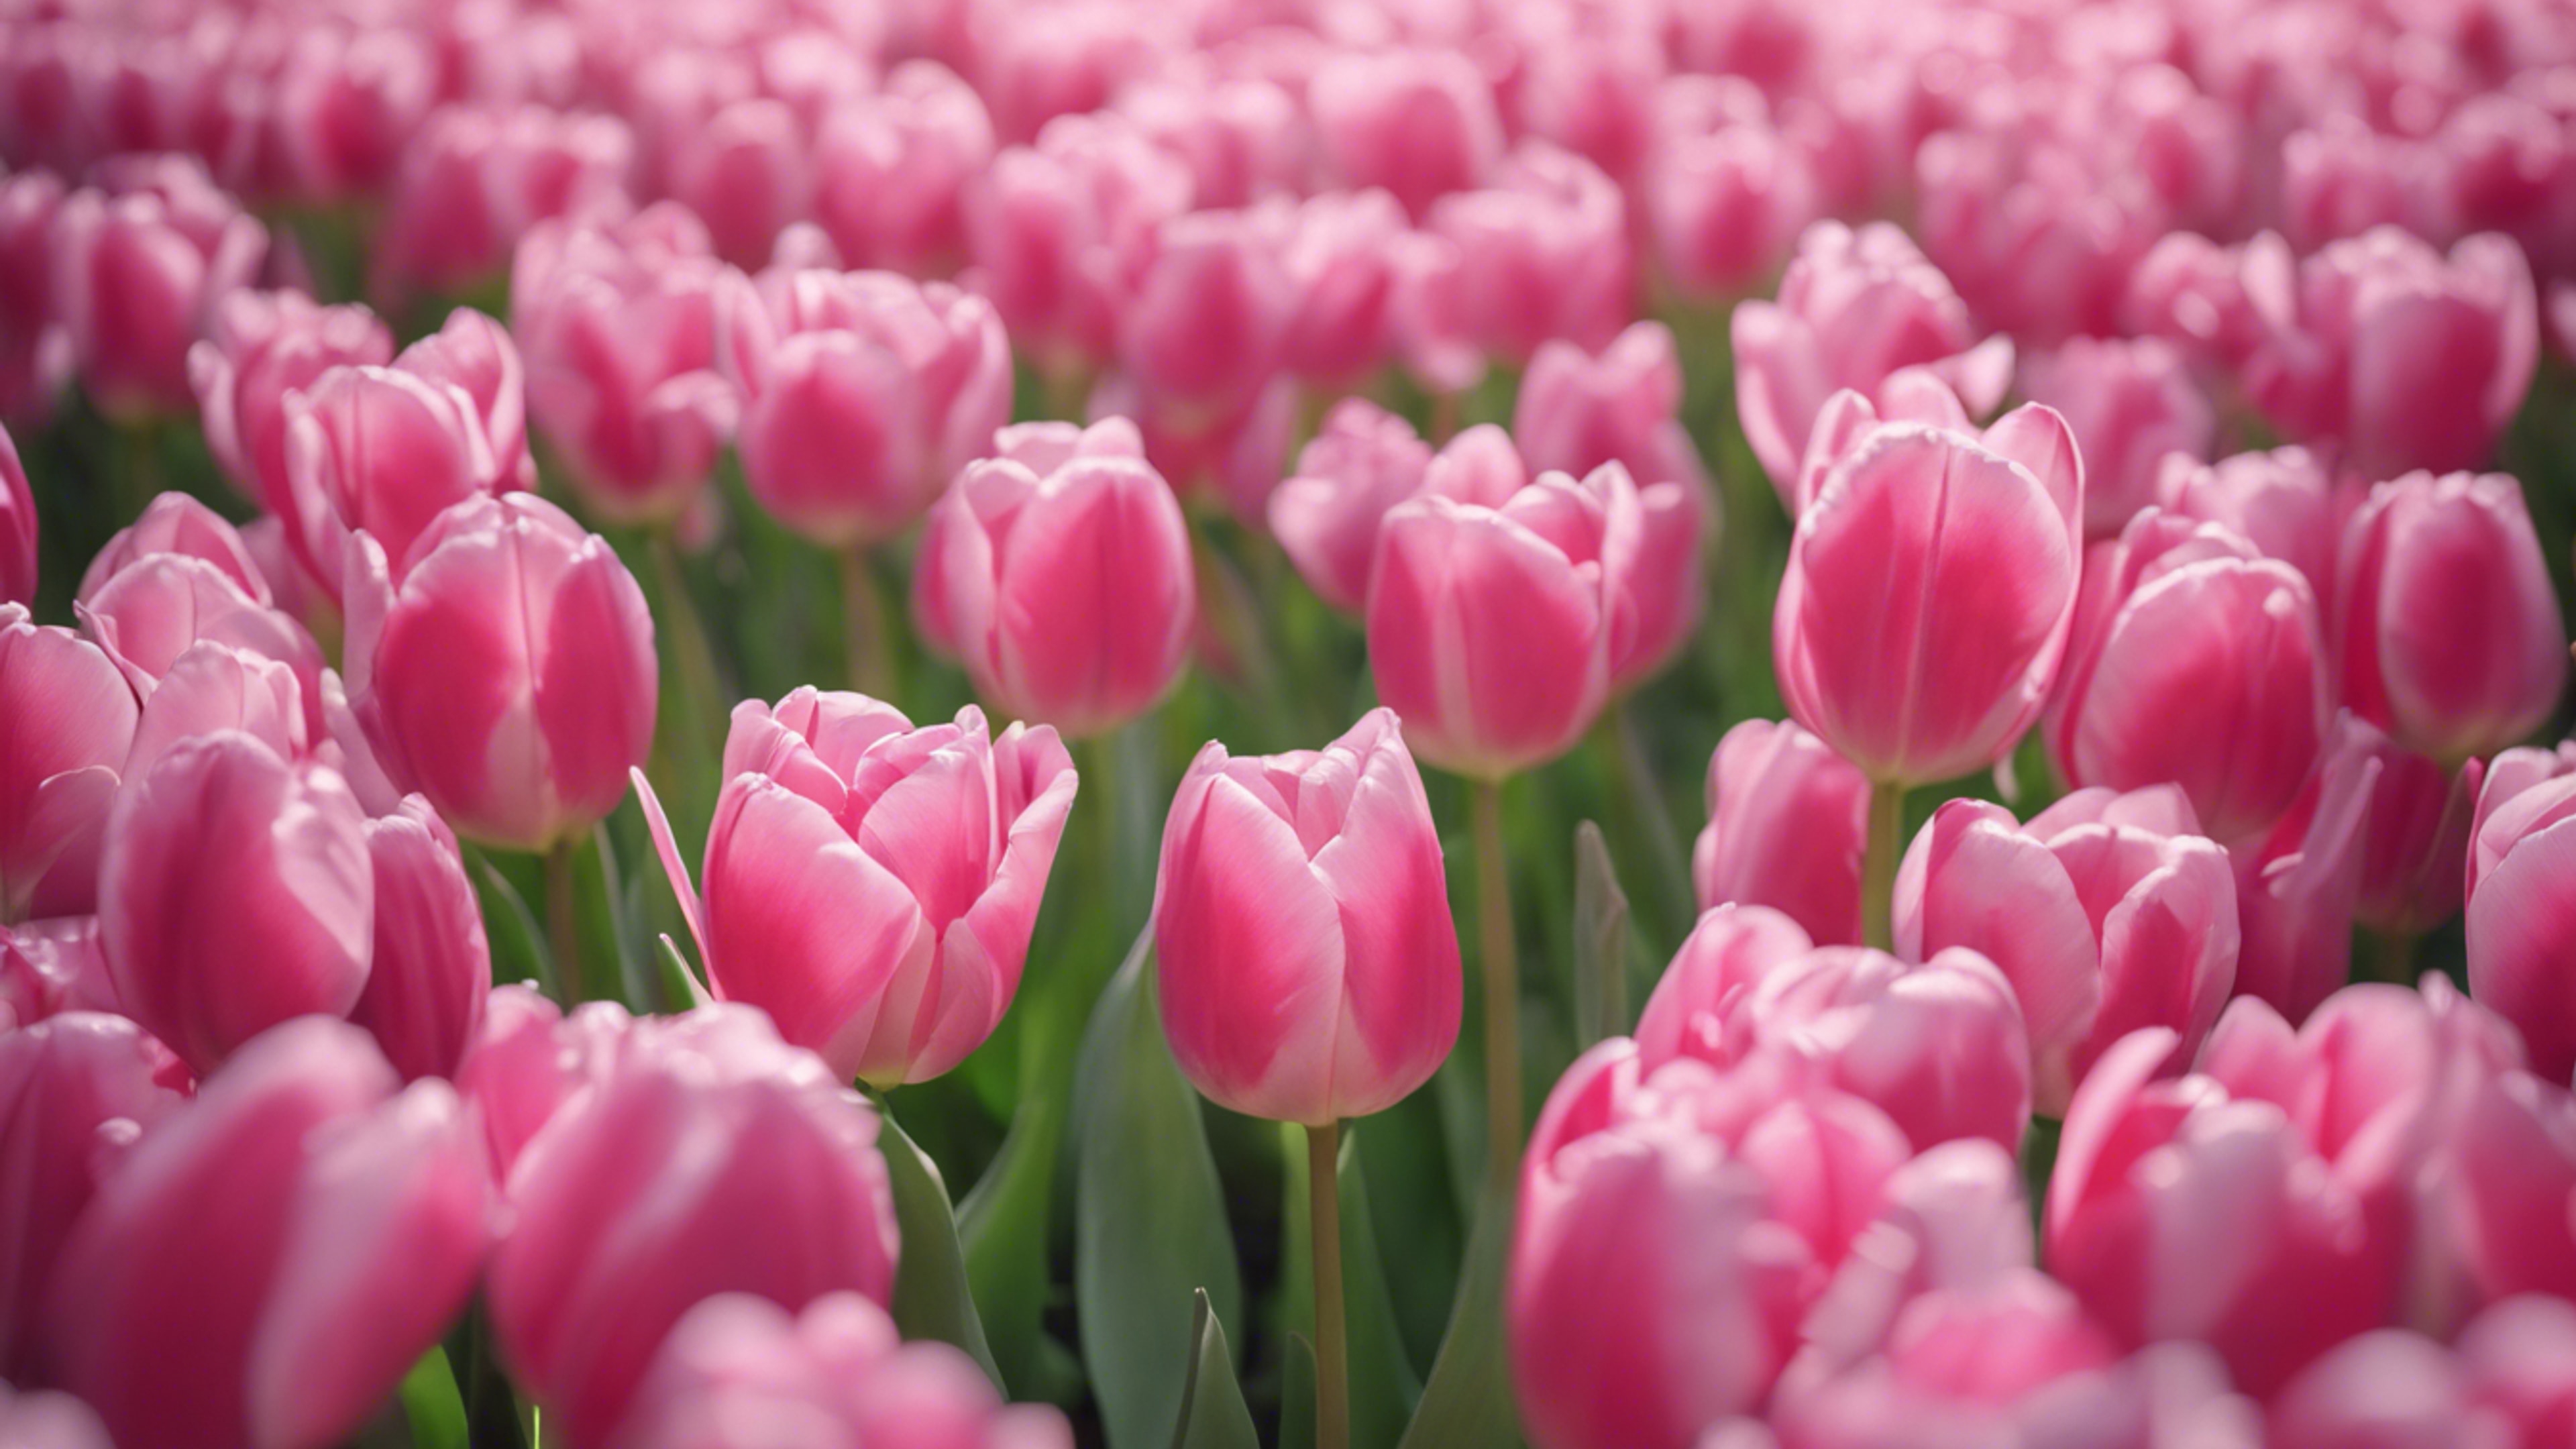 A group of pink tulips forming a perfect heart shape. Behang[03142173a34943bc92d4]